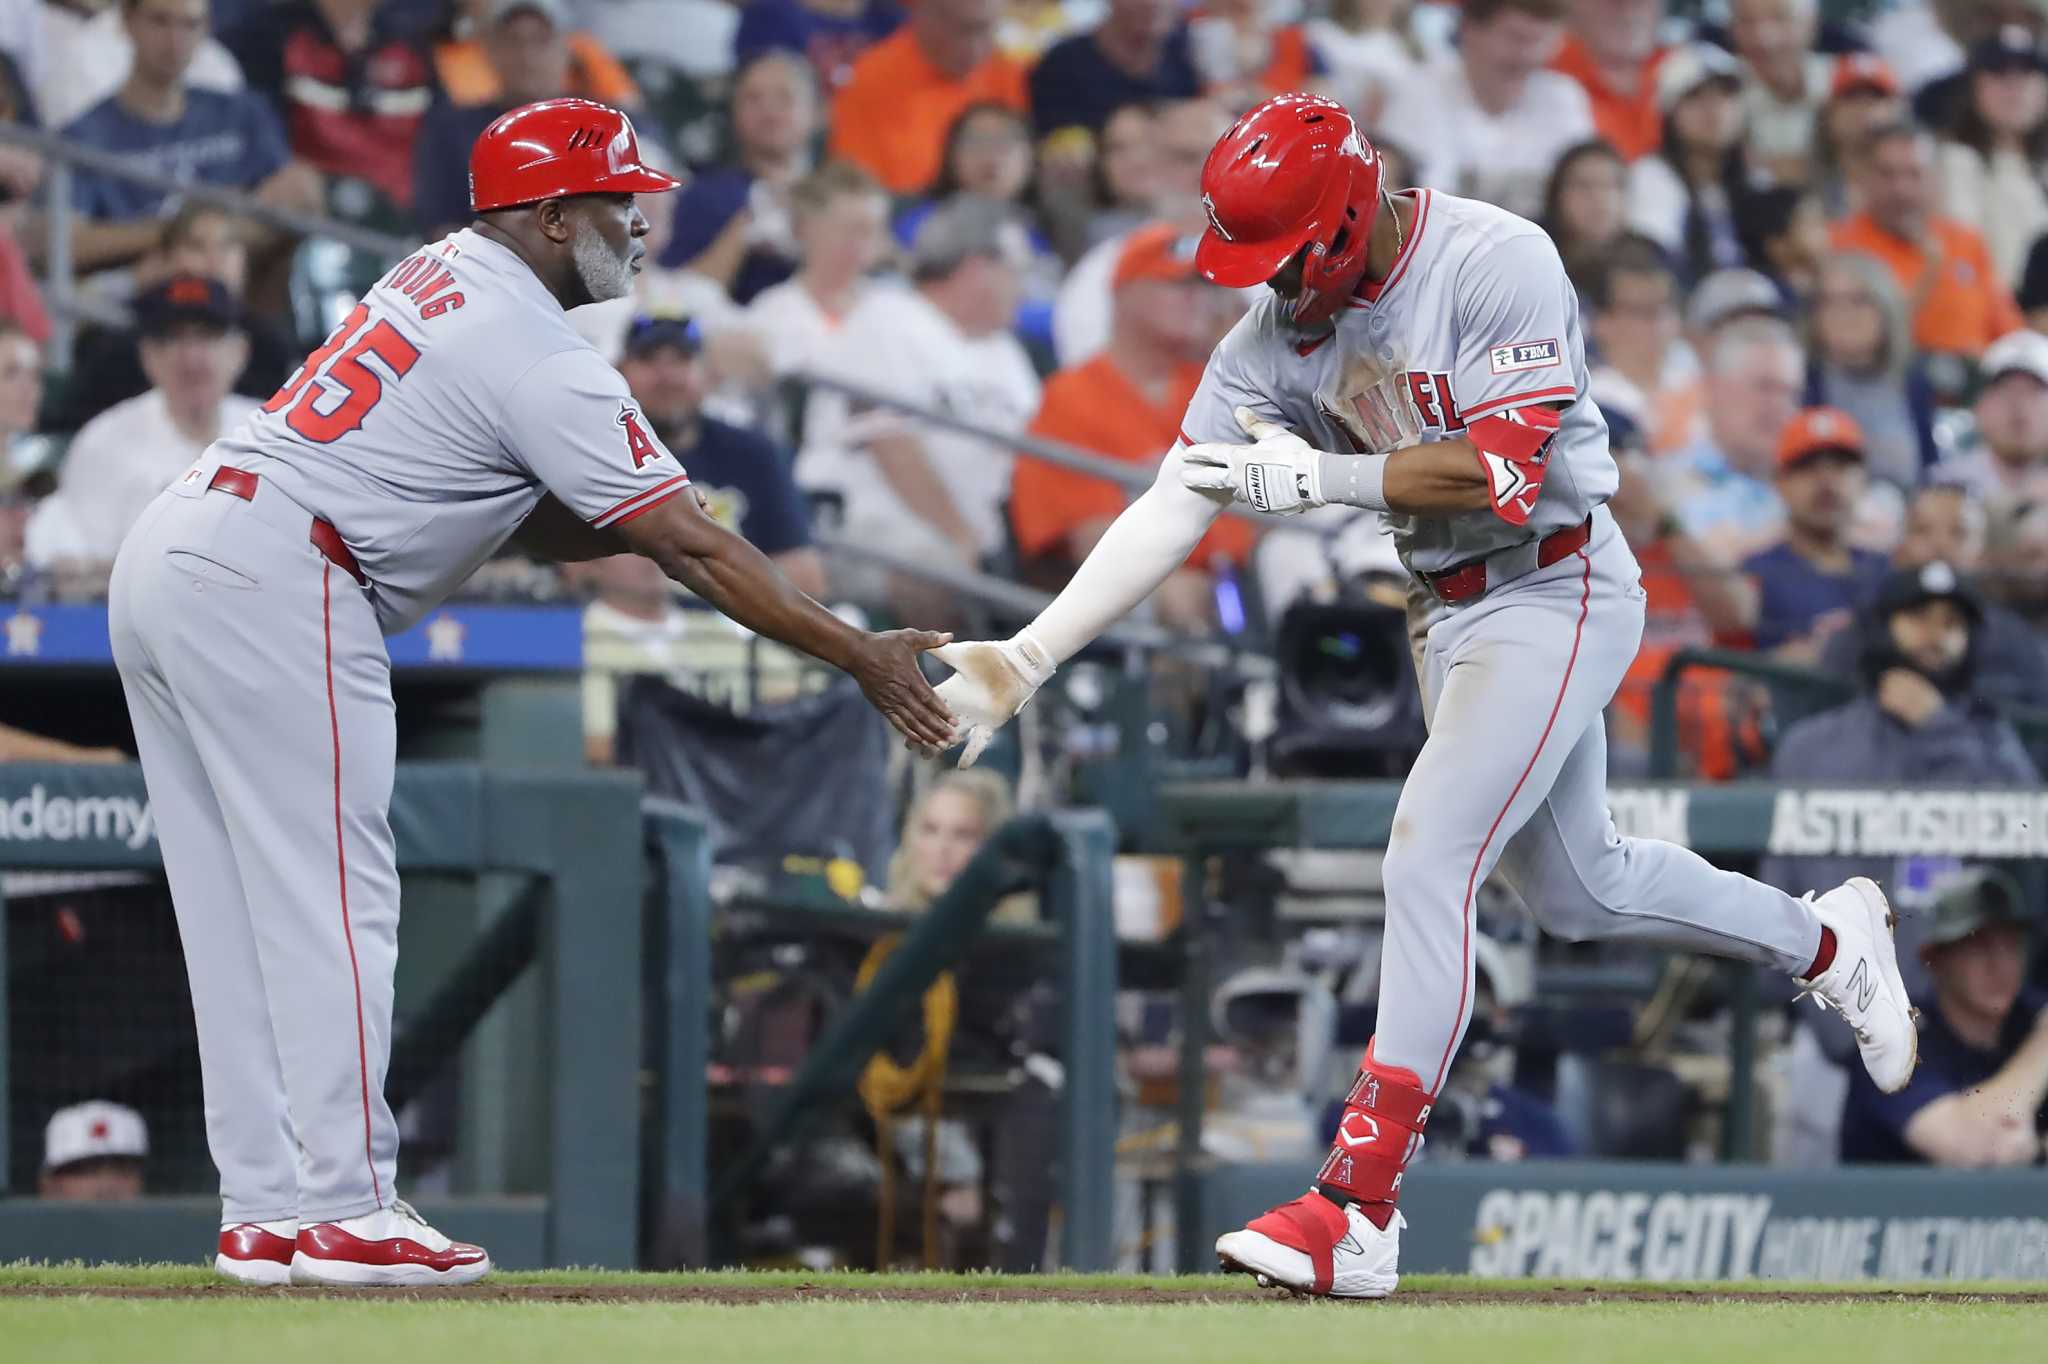 Paris gets his first MLB homer on a 2-run shot to lead the Angels to a 2-1 win over the Astros